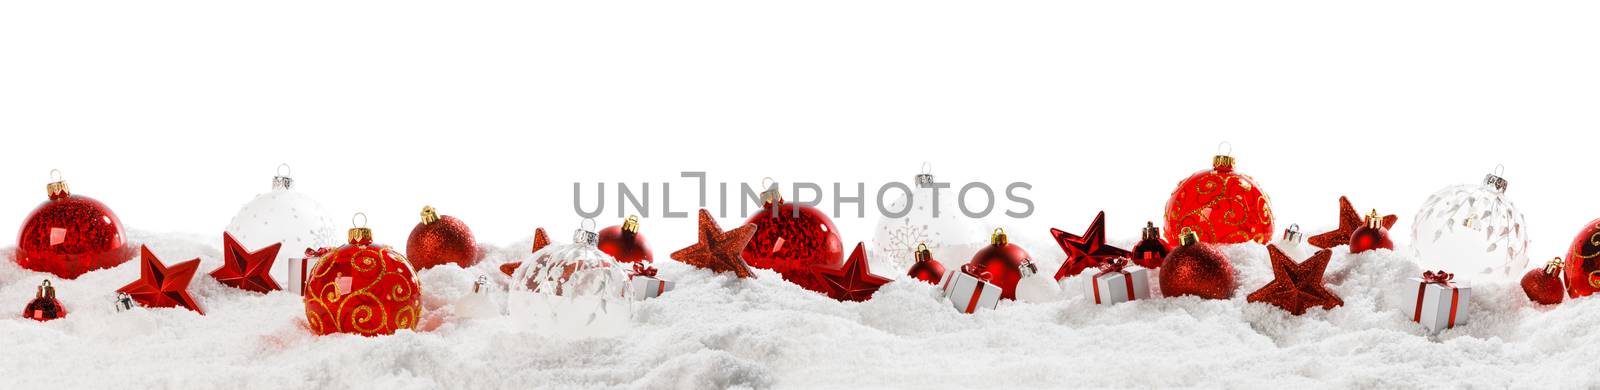 Christmas decoration frame of balls stars and gifts in snow in a row isolated on white background copy space for text design element